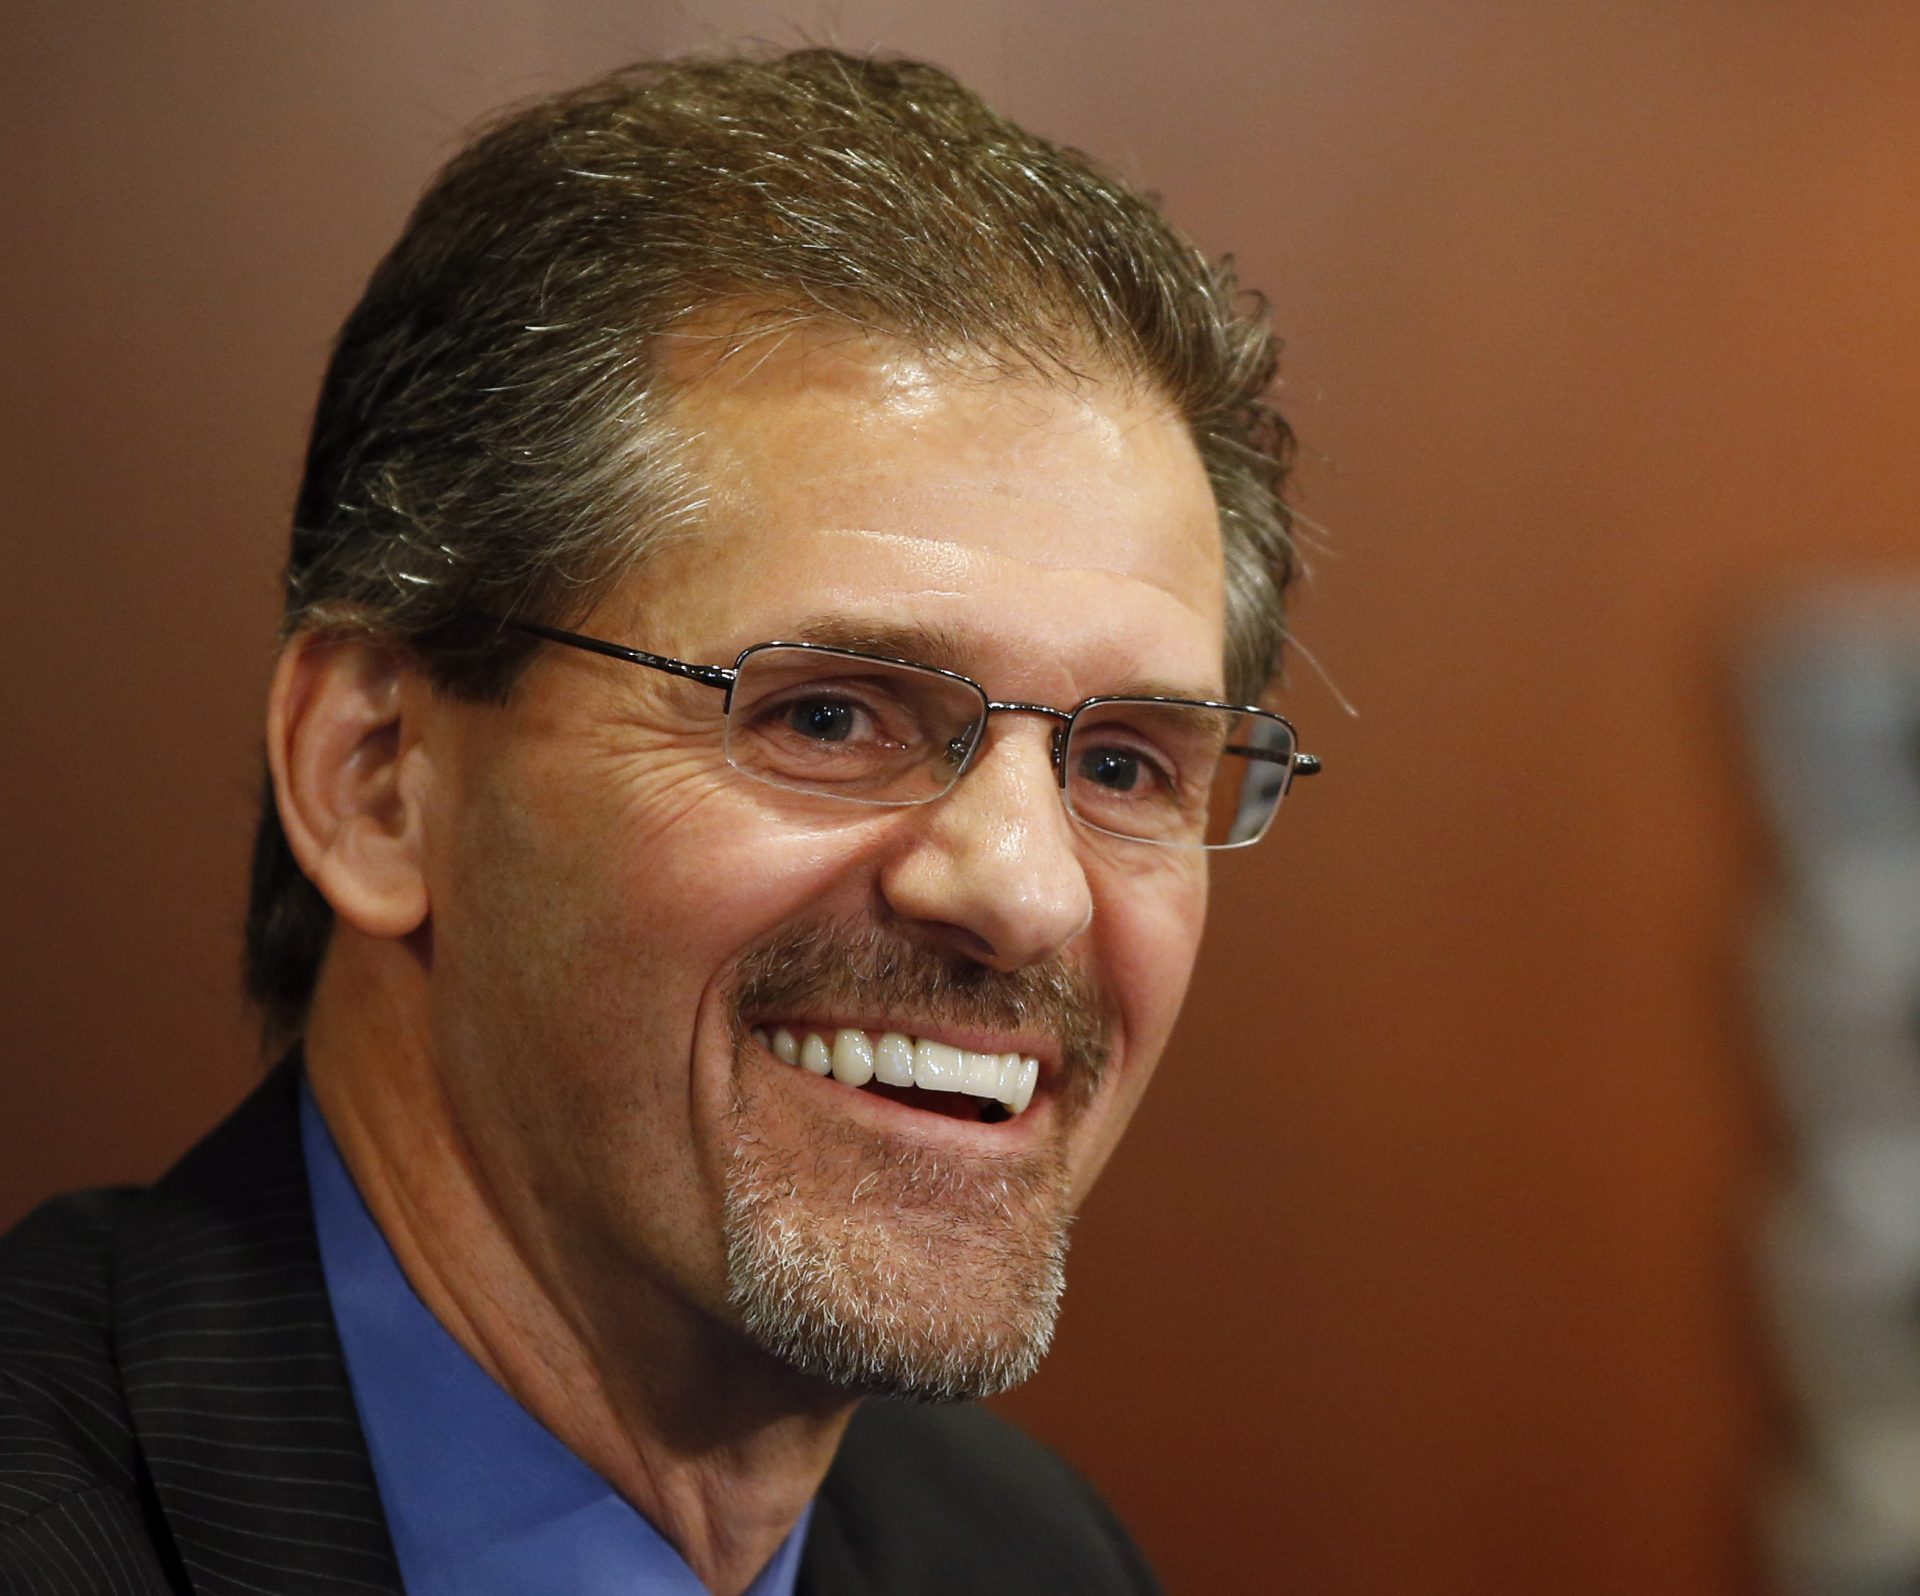 In this May 7, 2014, file photo, Philadelphia Flyers general manager Ron Hextall laughs during an NHL hockey news conference in Philadelphia. Mario Lemieux and the Pittsburgh Penguins are turning to a former rival to help them keep the Stanley Cup window open for Sidney Crosby and company. The team hired former Philadelphia Flyer goaltender and general manager Ron Hextall as the team's general manager on Tuesday, Feb. 9, 2021.